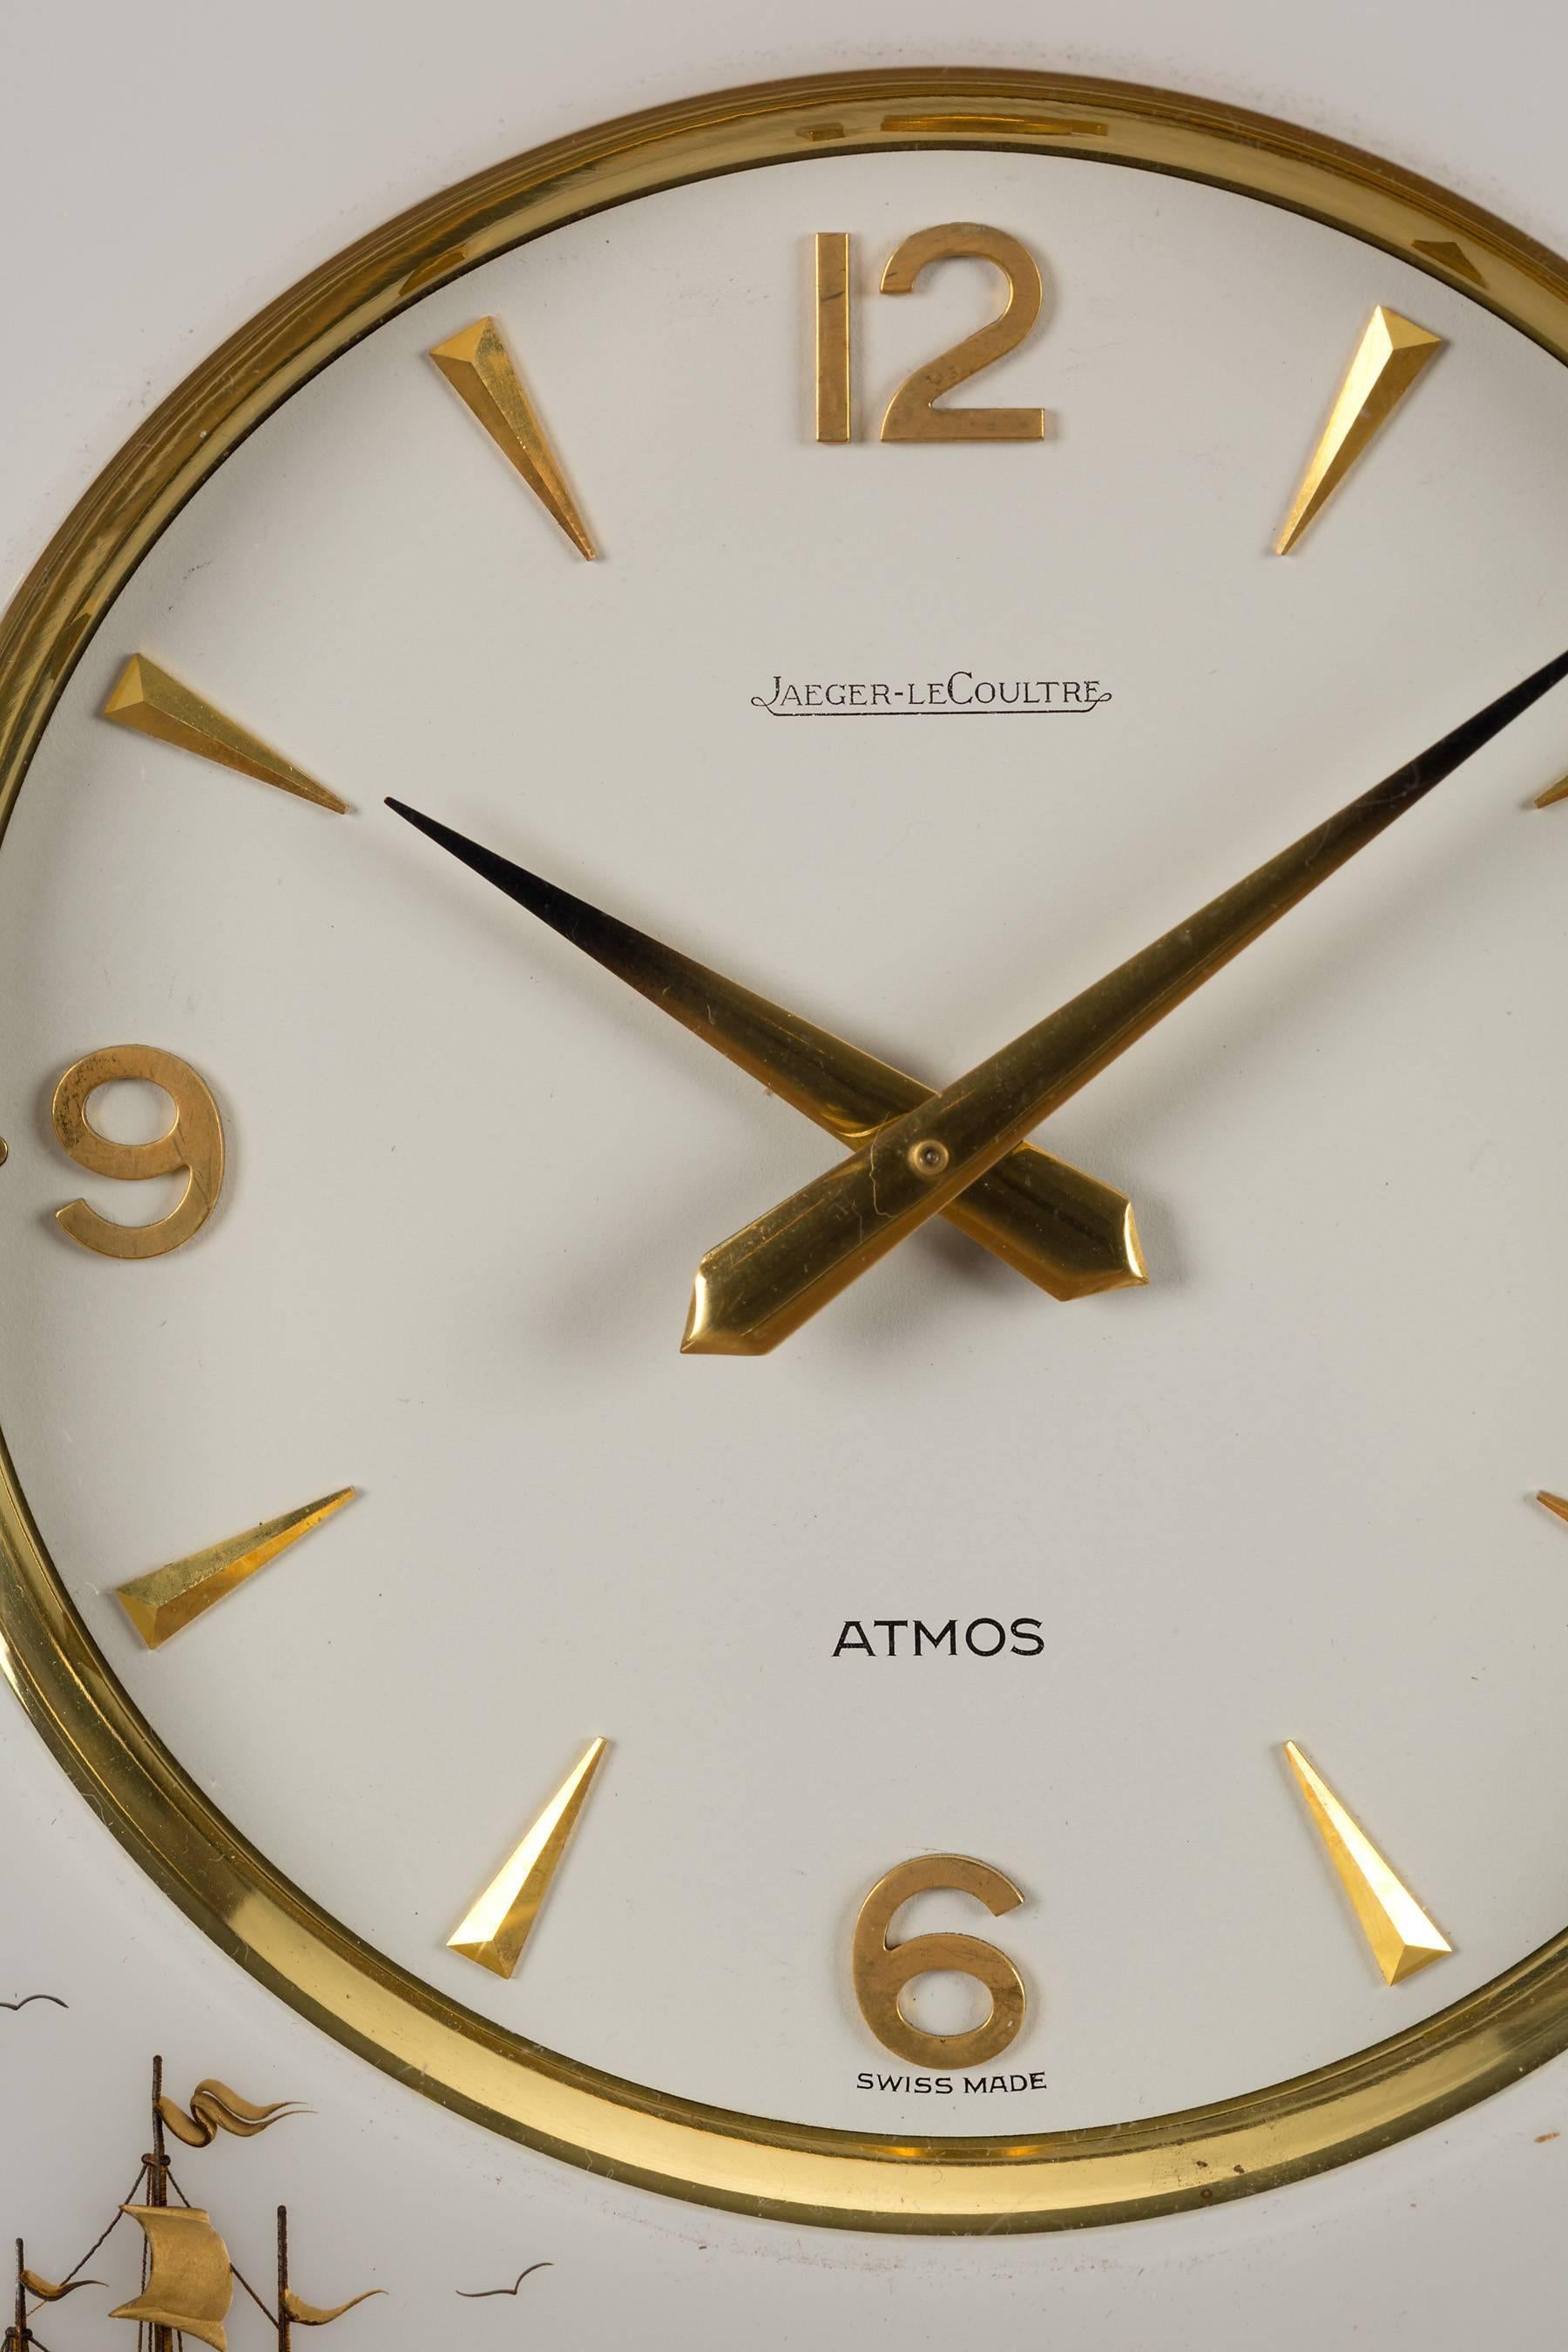 Swiss Gold-Plated Marina Atmos Clock by Jaeger Le Coultre For Sale